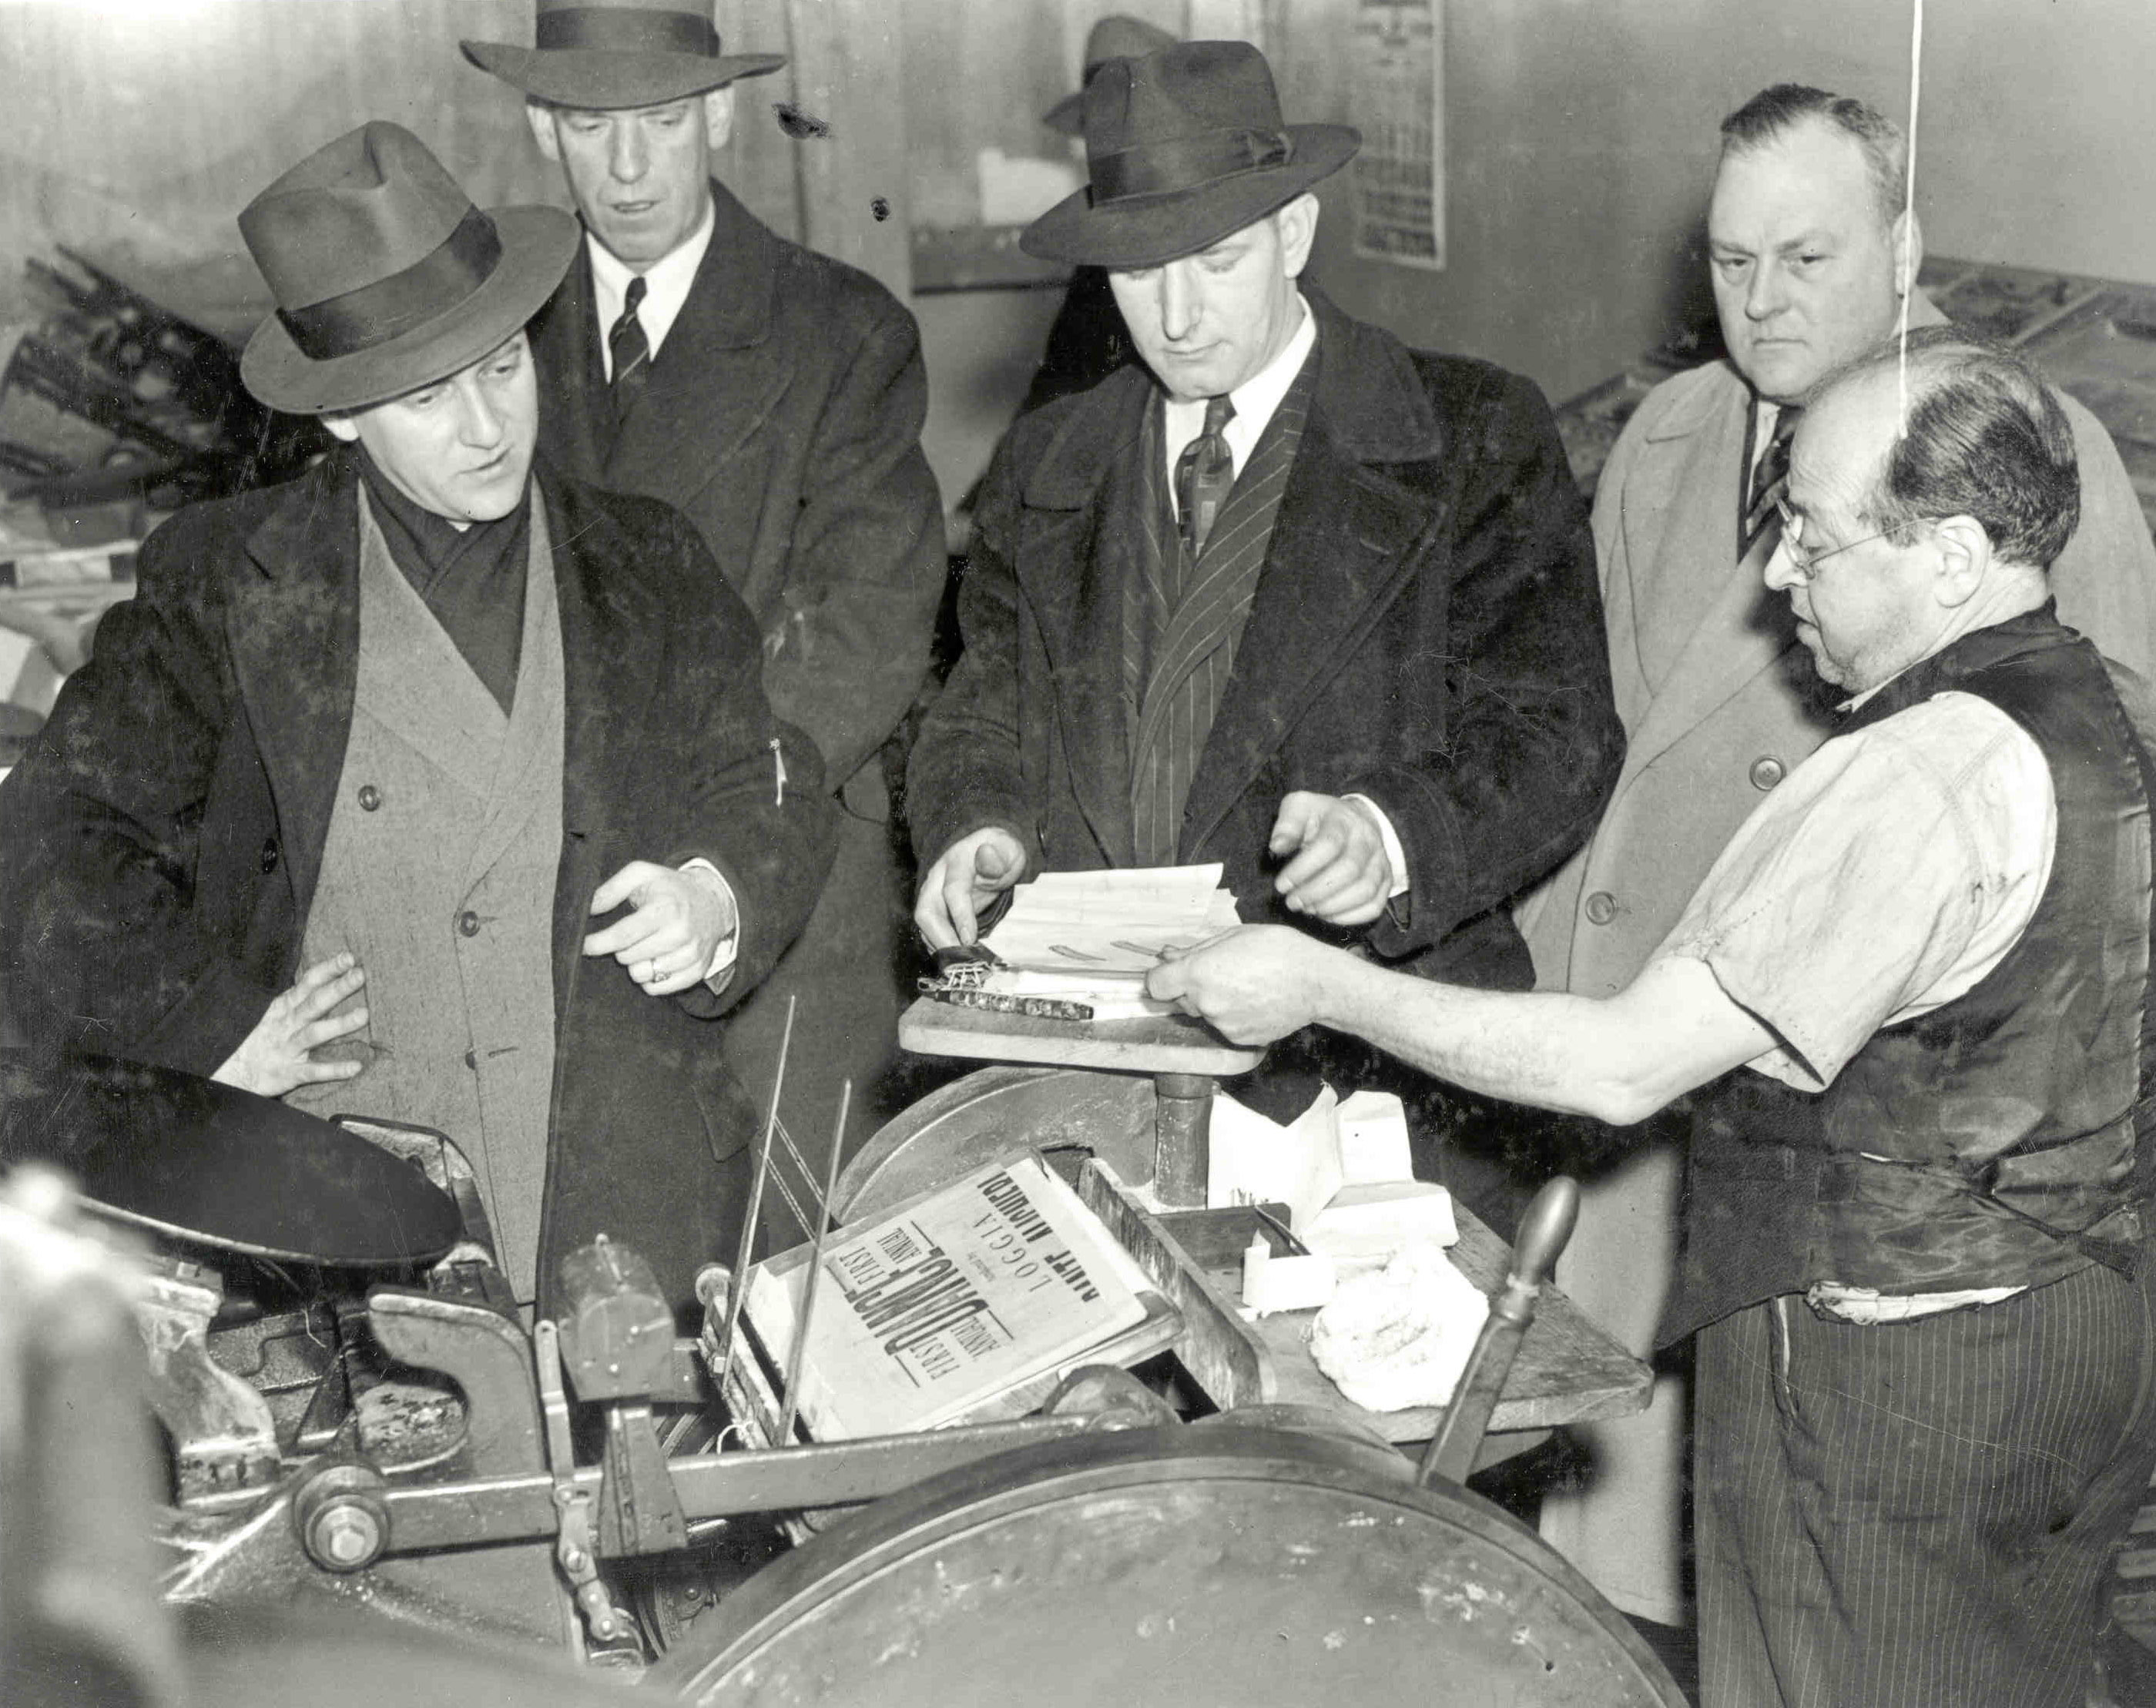 Special Agents examine evidence during a raid in 1943.